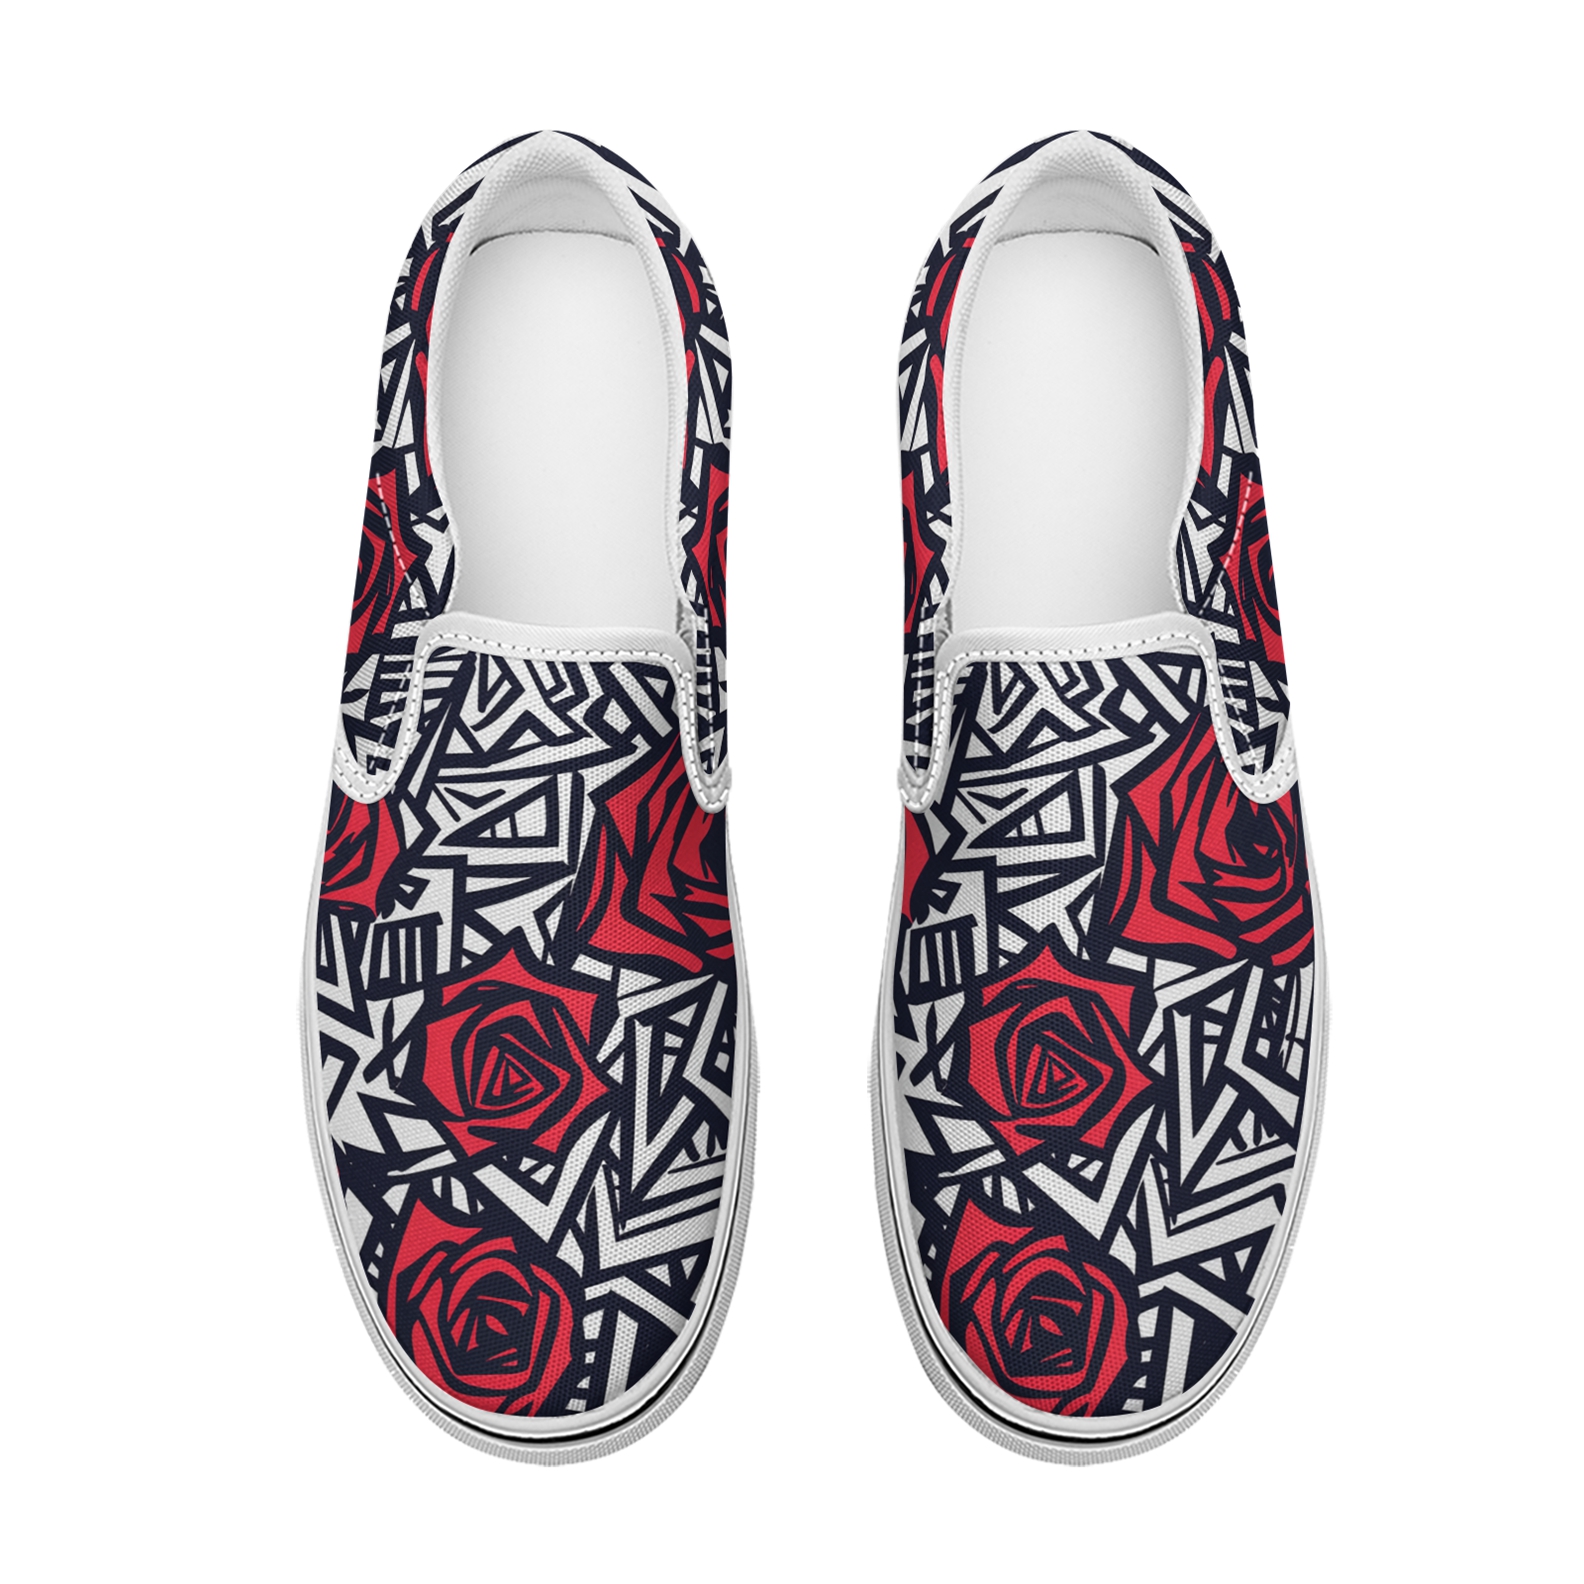 Women's fashion red and white rose print pattern flat canvas slippers casual shoes light and comfortable travel shoes